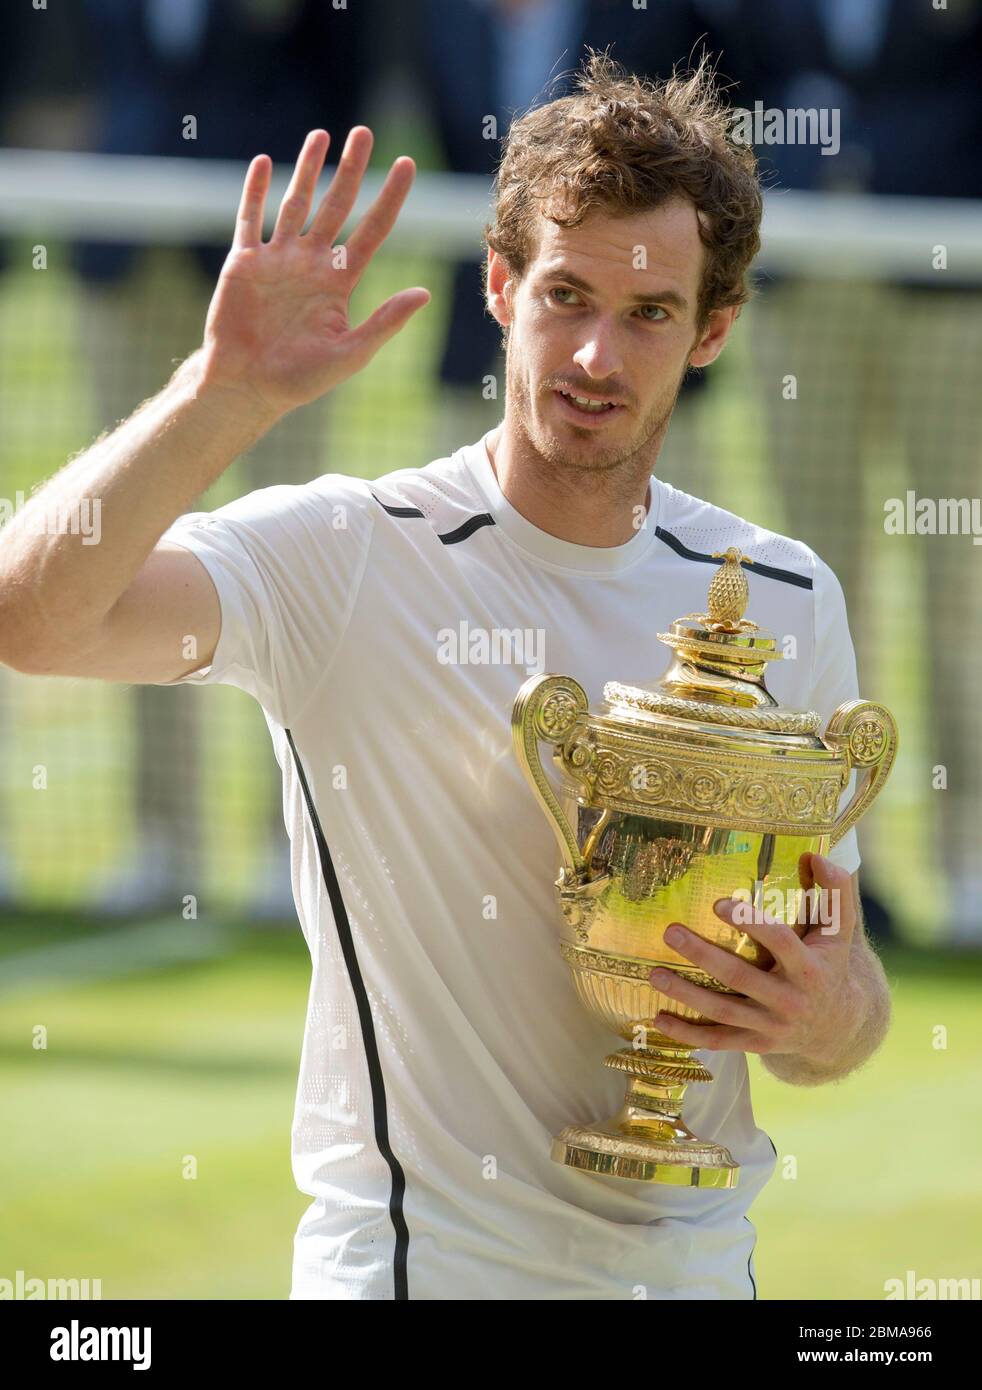 10th July, 2016, Wimbledon, London: Mens Singles Final, Centre Court, Andy Murray holds the Wimbledon trophy after defeating Canada's Milos Raonic. Stock Photo